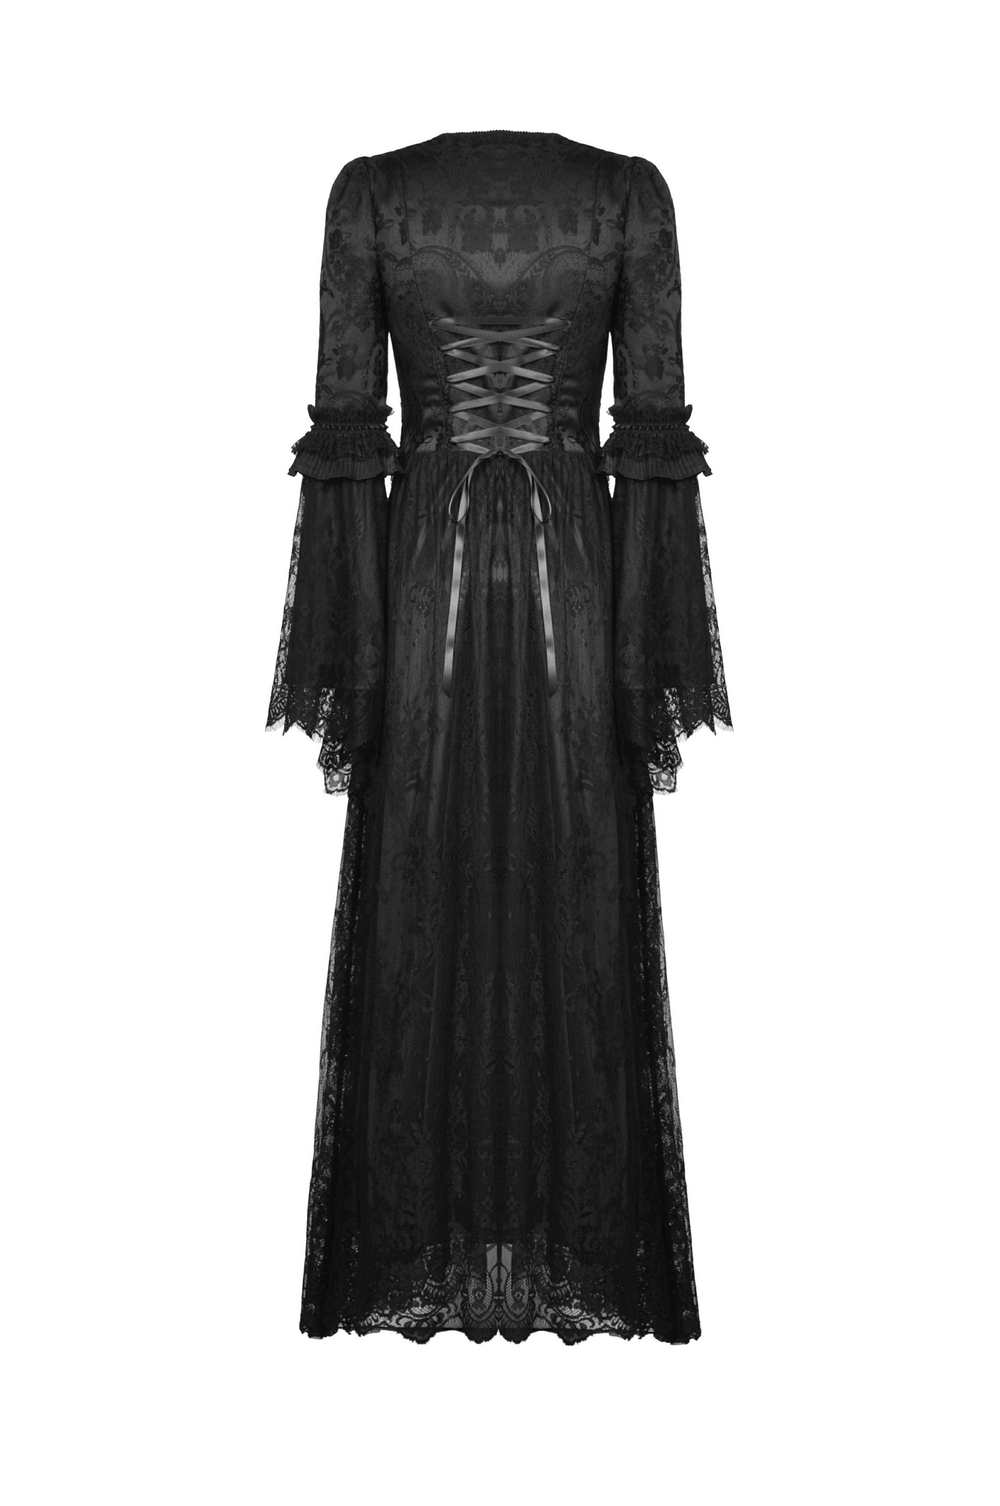 Black Gothic Long Sleeves Lace Maxi Dress with Red Brooch